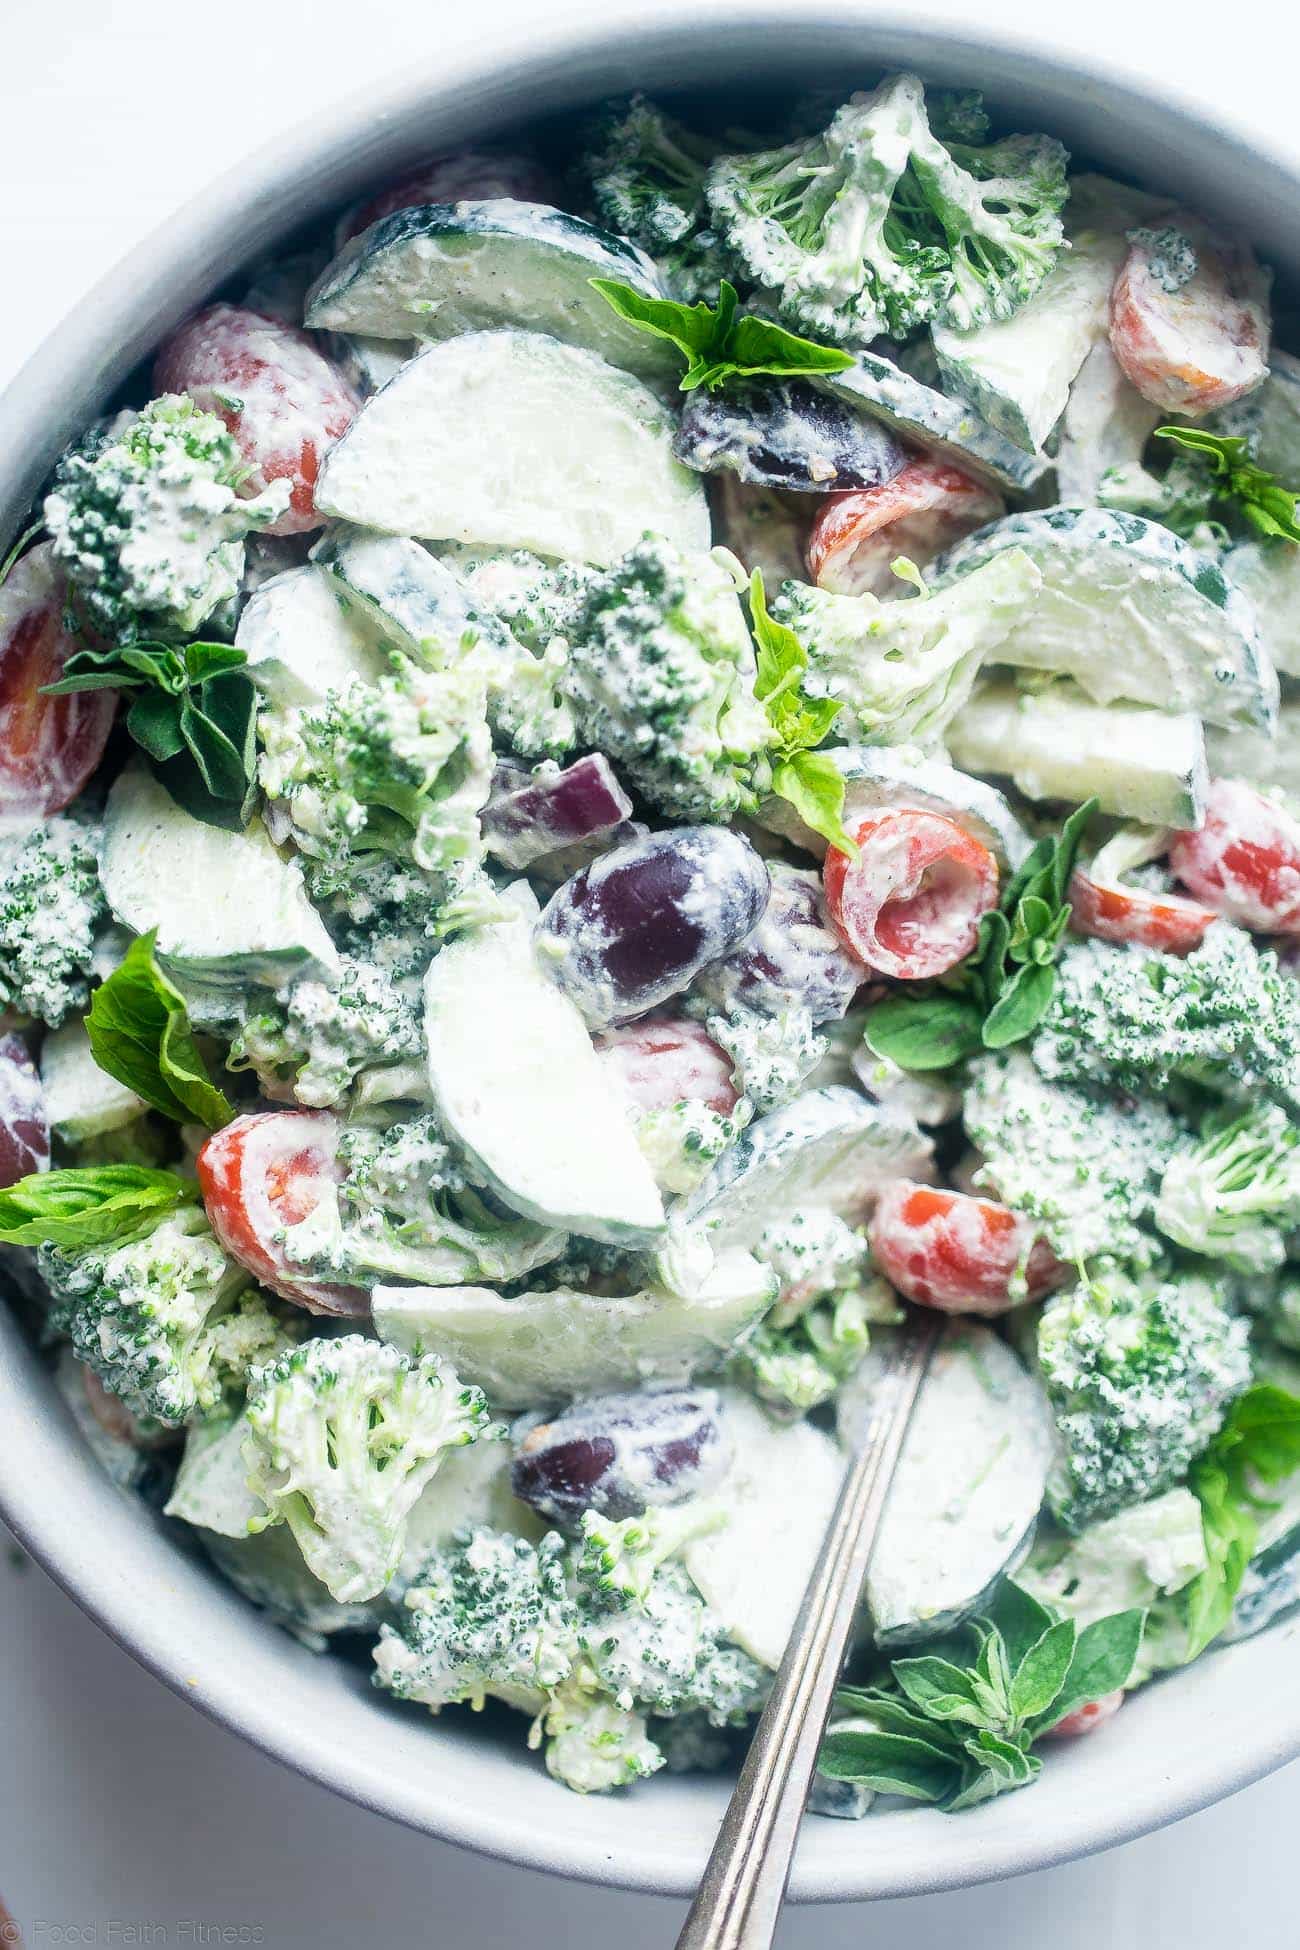 Greek Paleo Broccoli Salad - This low carb, raw broccoli salad is so creamy you'll never know it's vegan, paleo and whole30 compliant! It's an easy side dish that's perfect for spring potlucks! | Foodfaithfitness.com | @FoodFaithFit